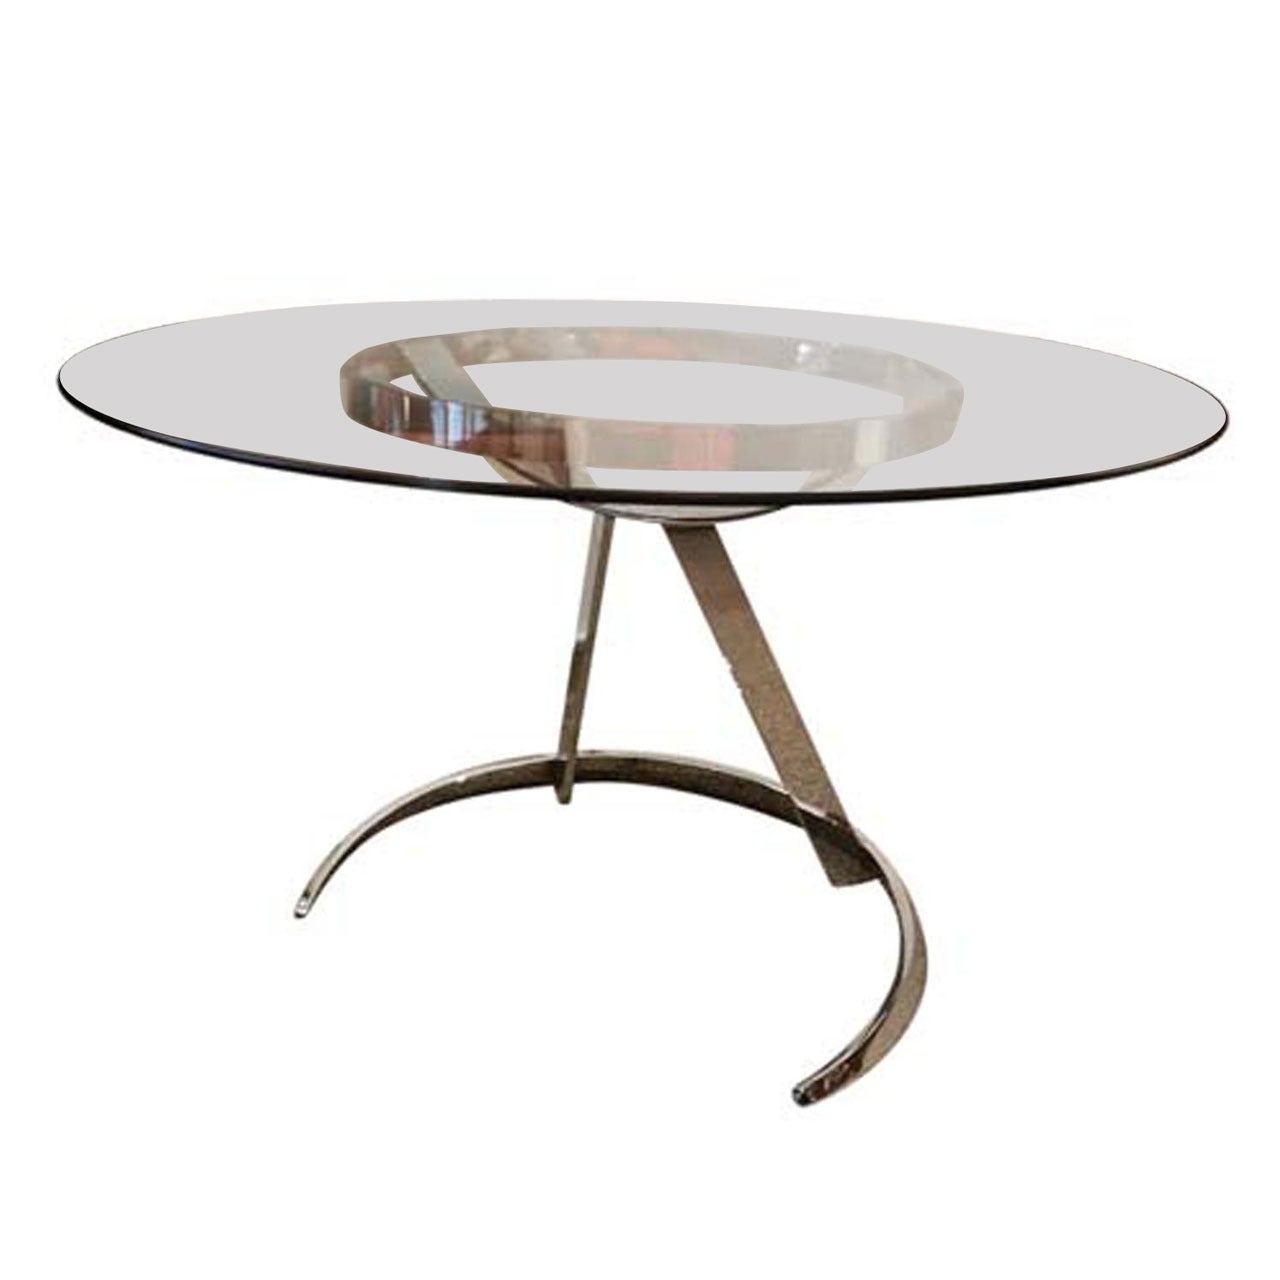 A Round Table in Glass and Chromed Steel by Boris Tabakoff